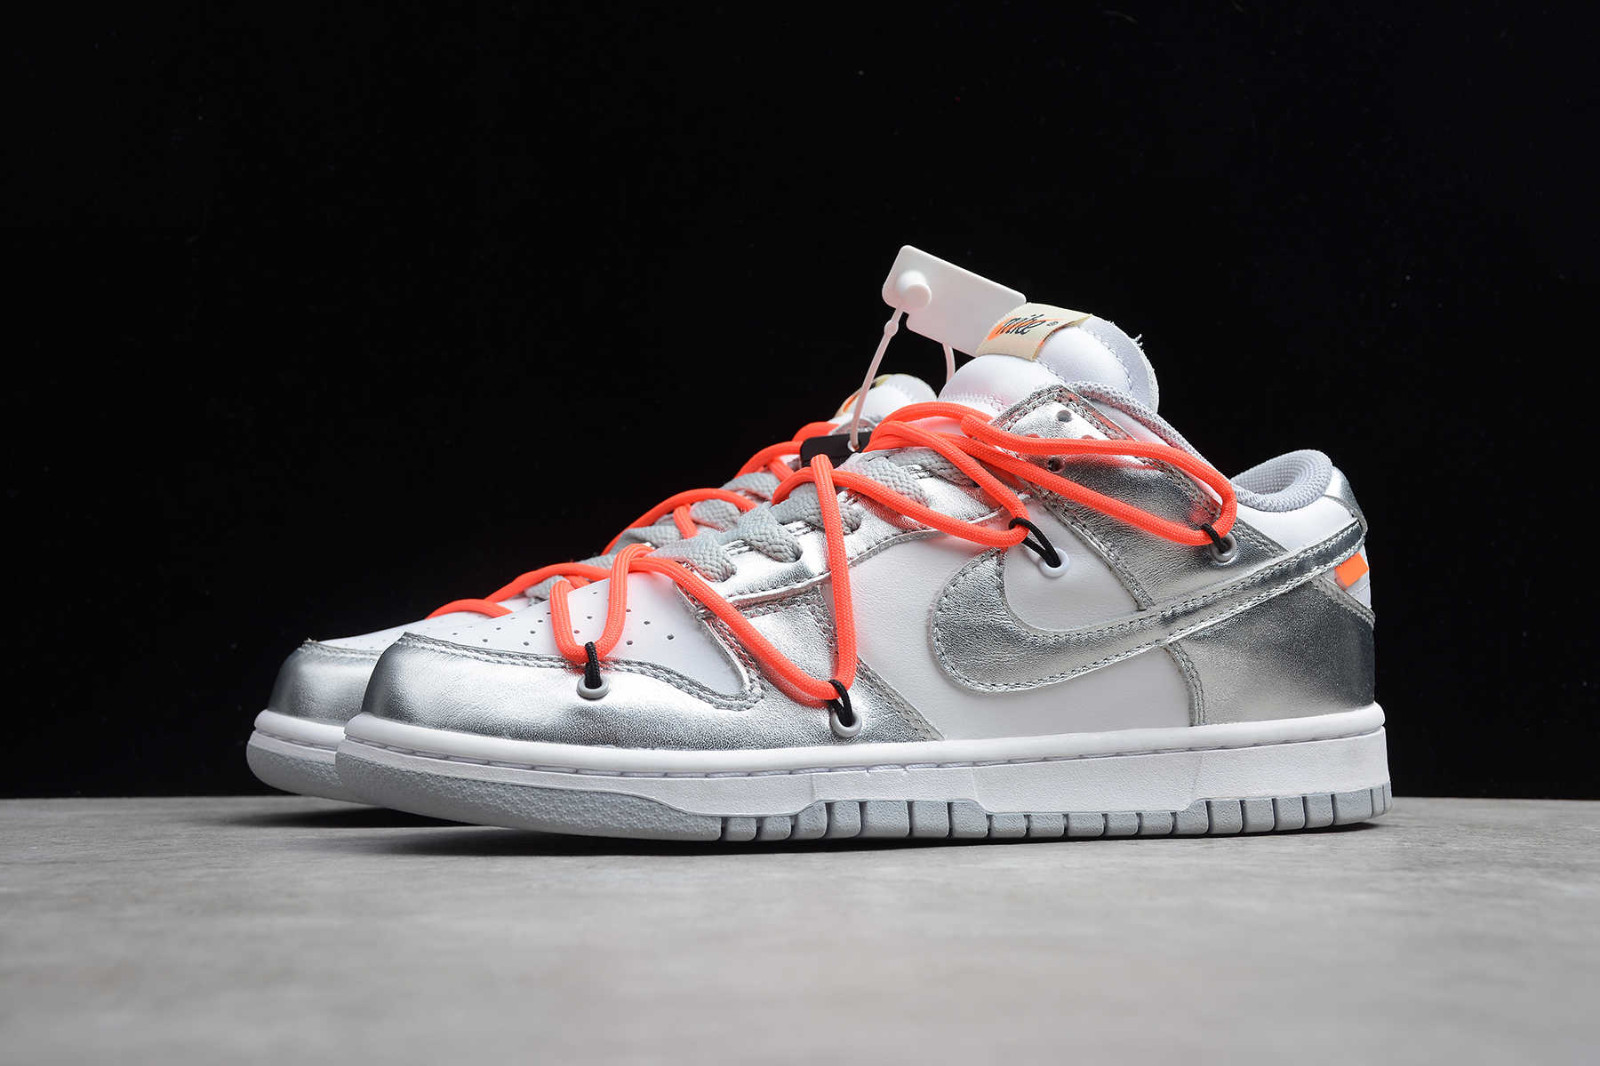 StclaircomoShops - The Off - White x Nike Dunk Low Collection